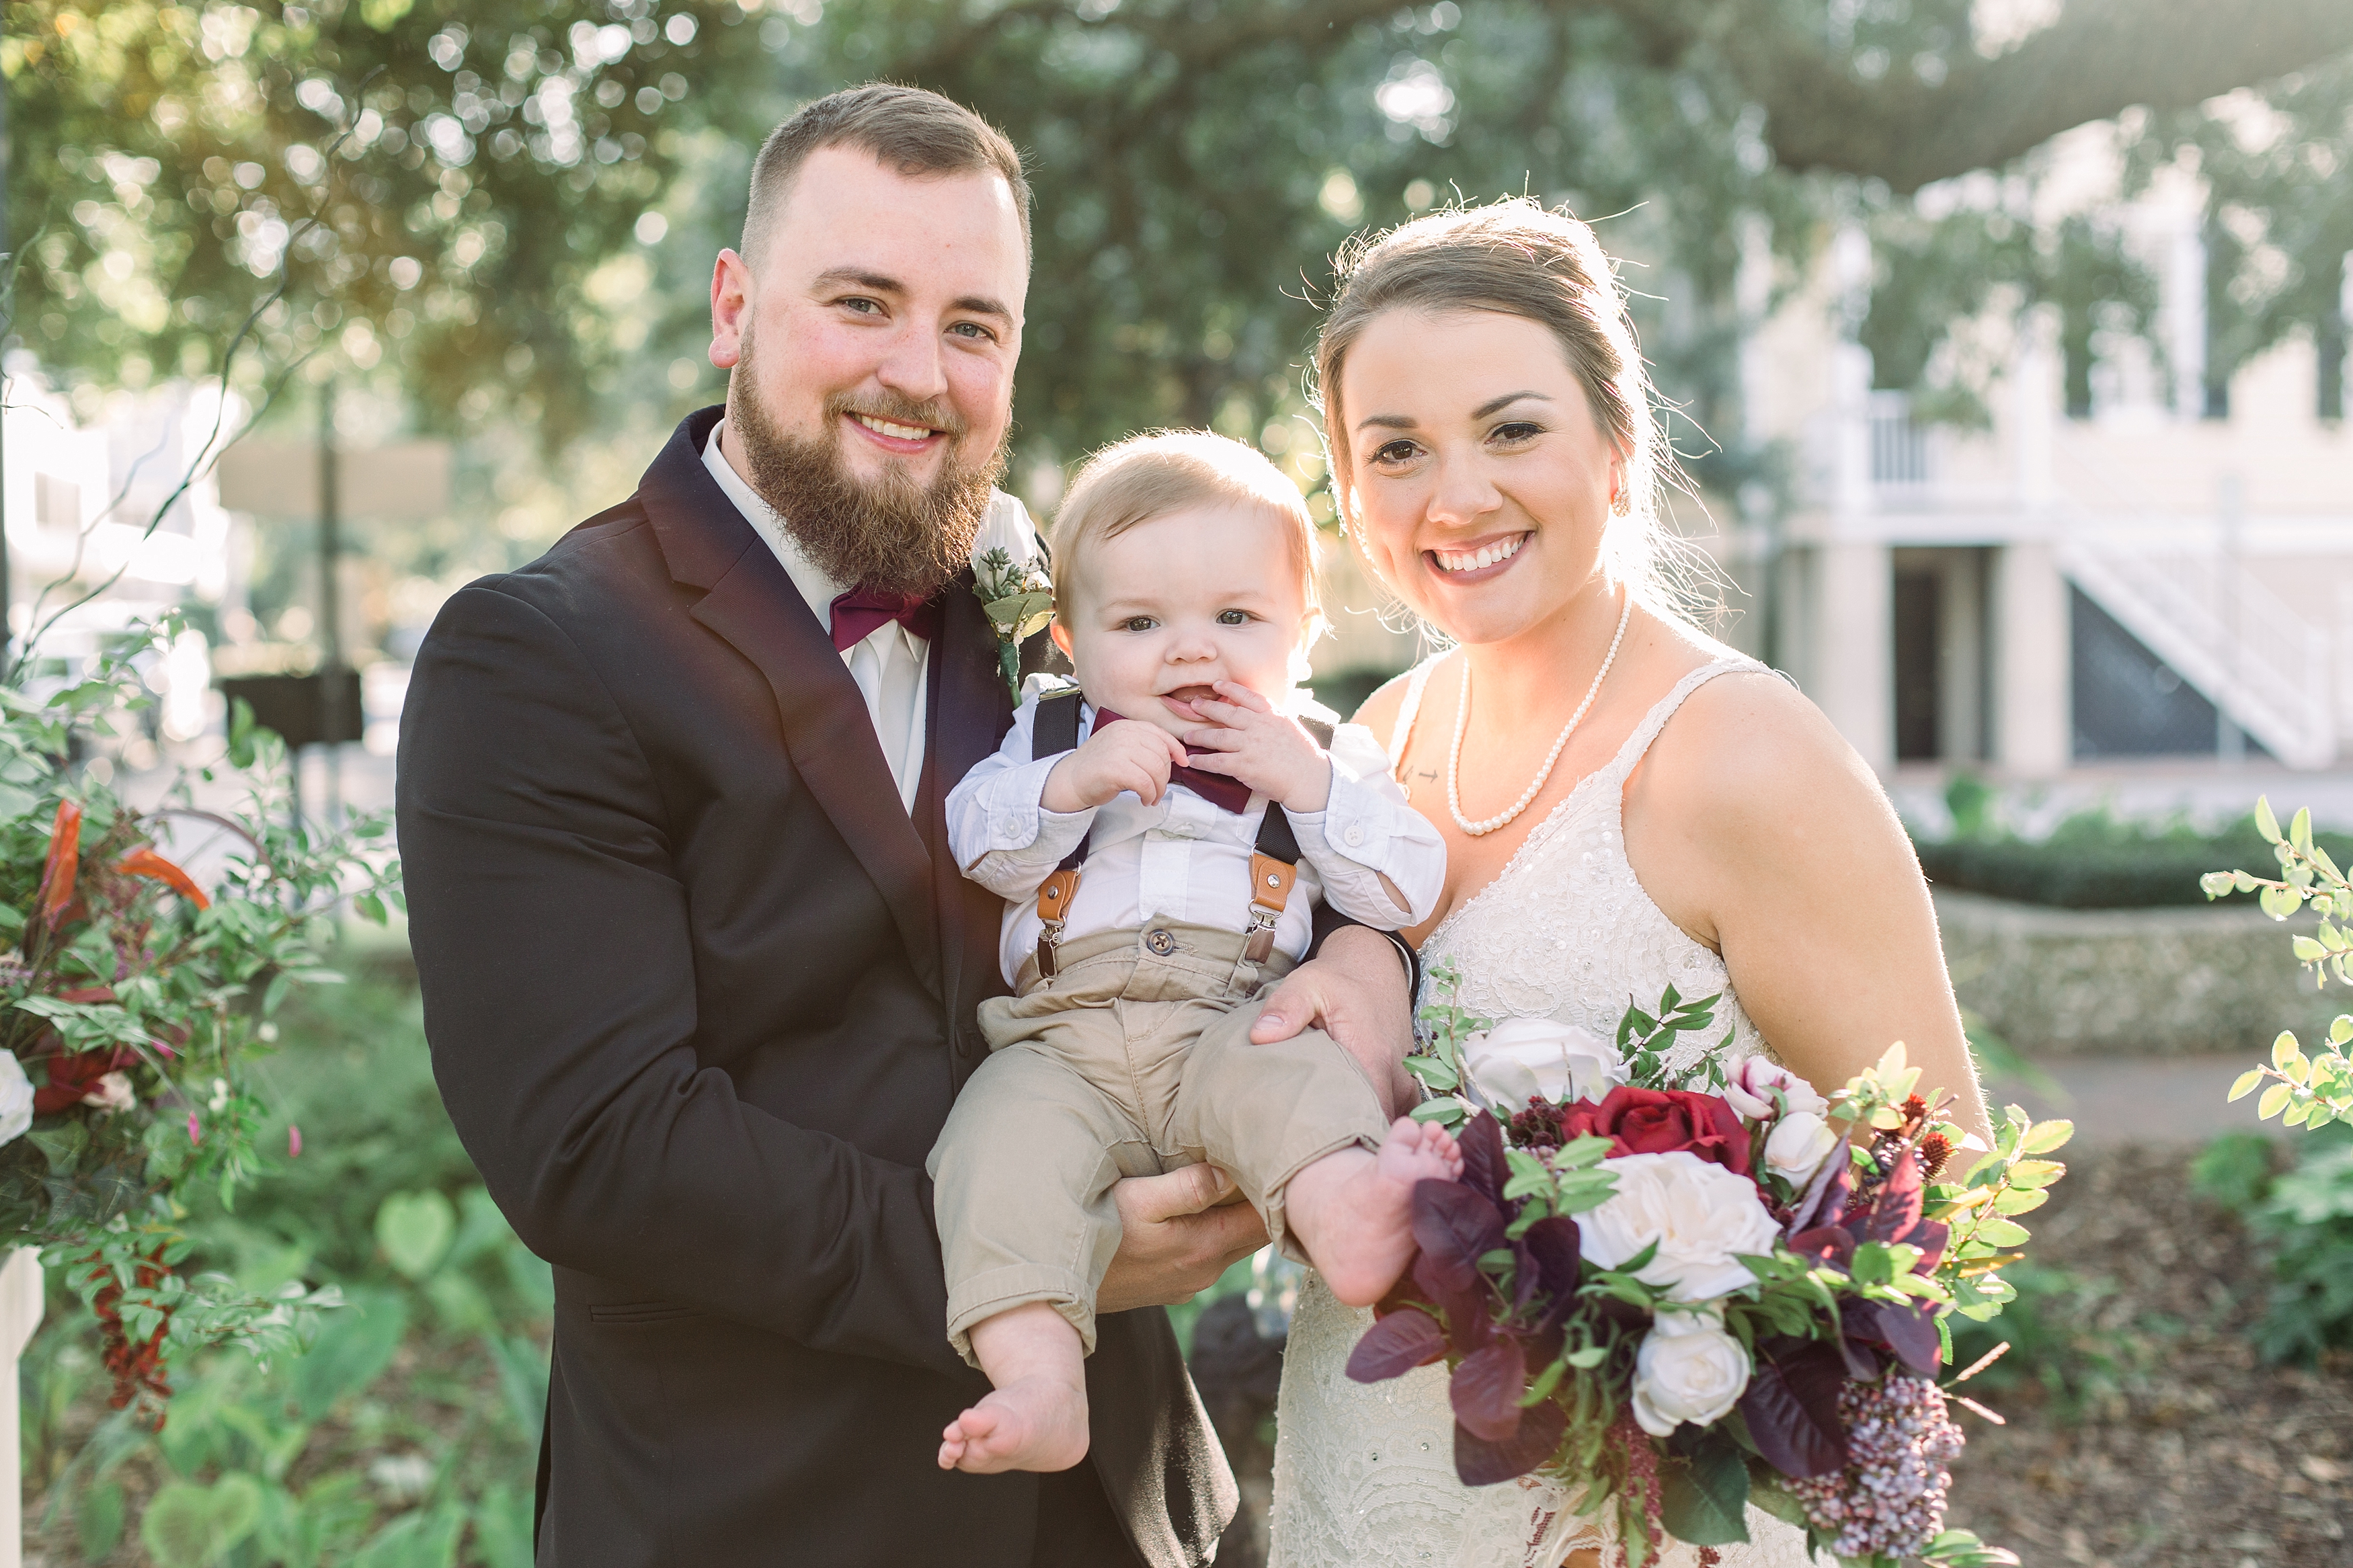 Bride and groom with their son on wedding day.